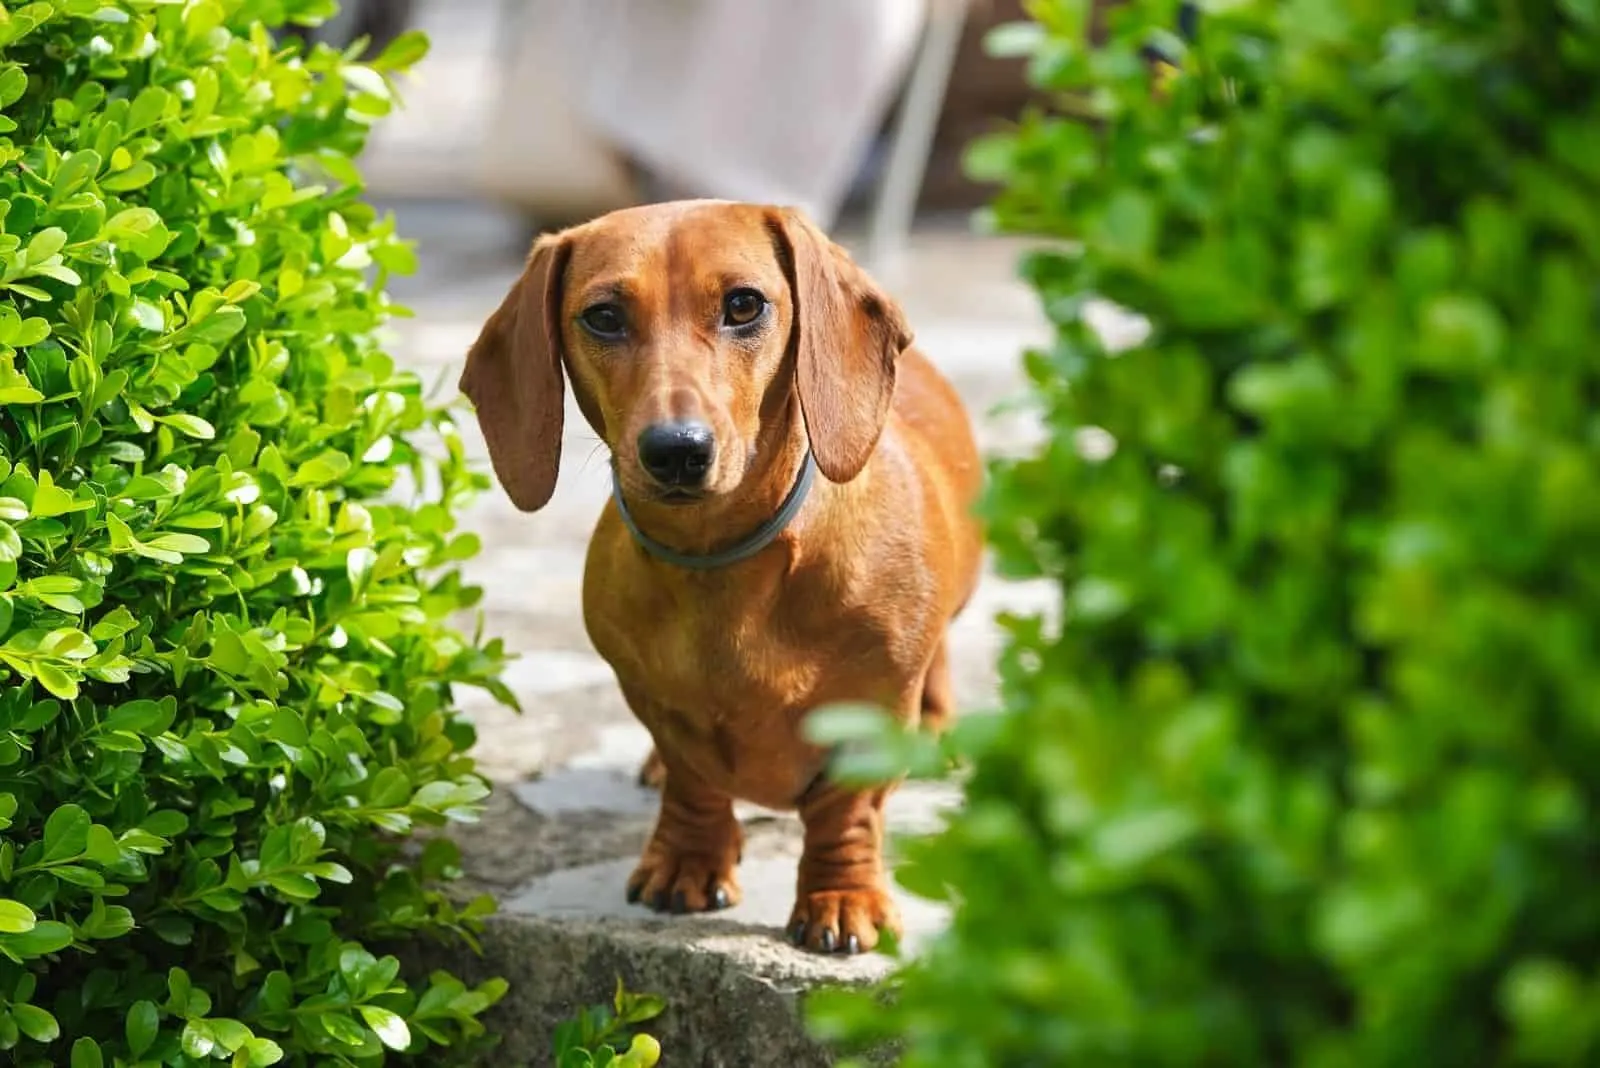 Cute brown Dachshund dog in collar standing near abundant green plants in sunny garden and looking at camera friendly